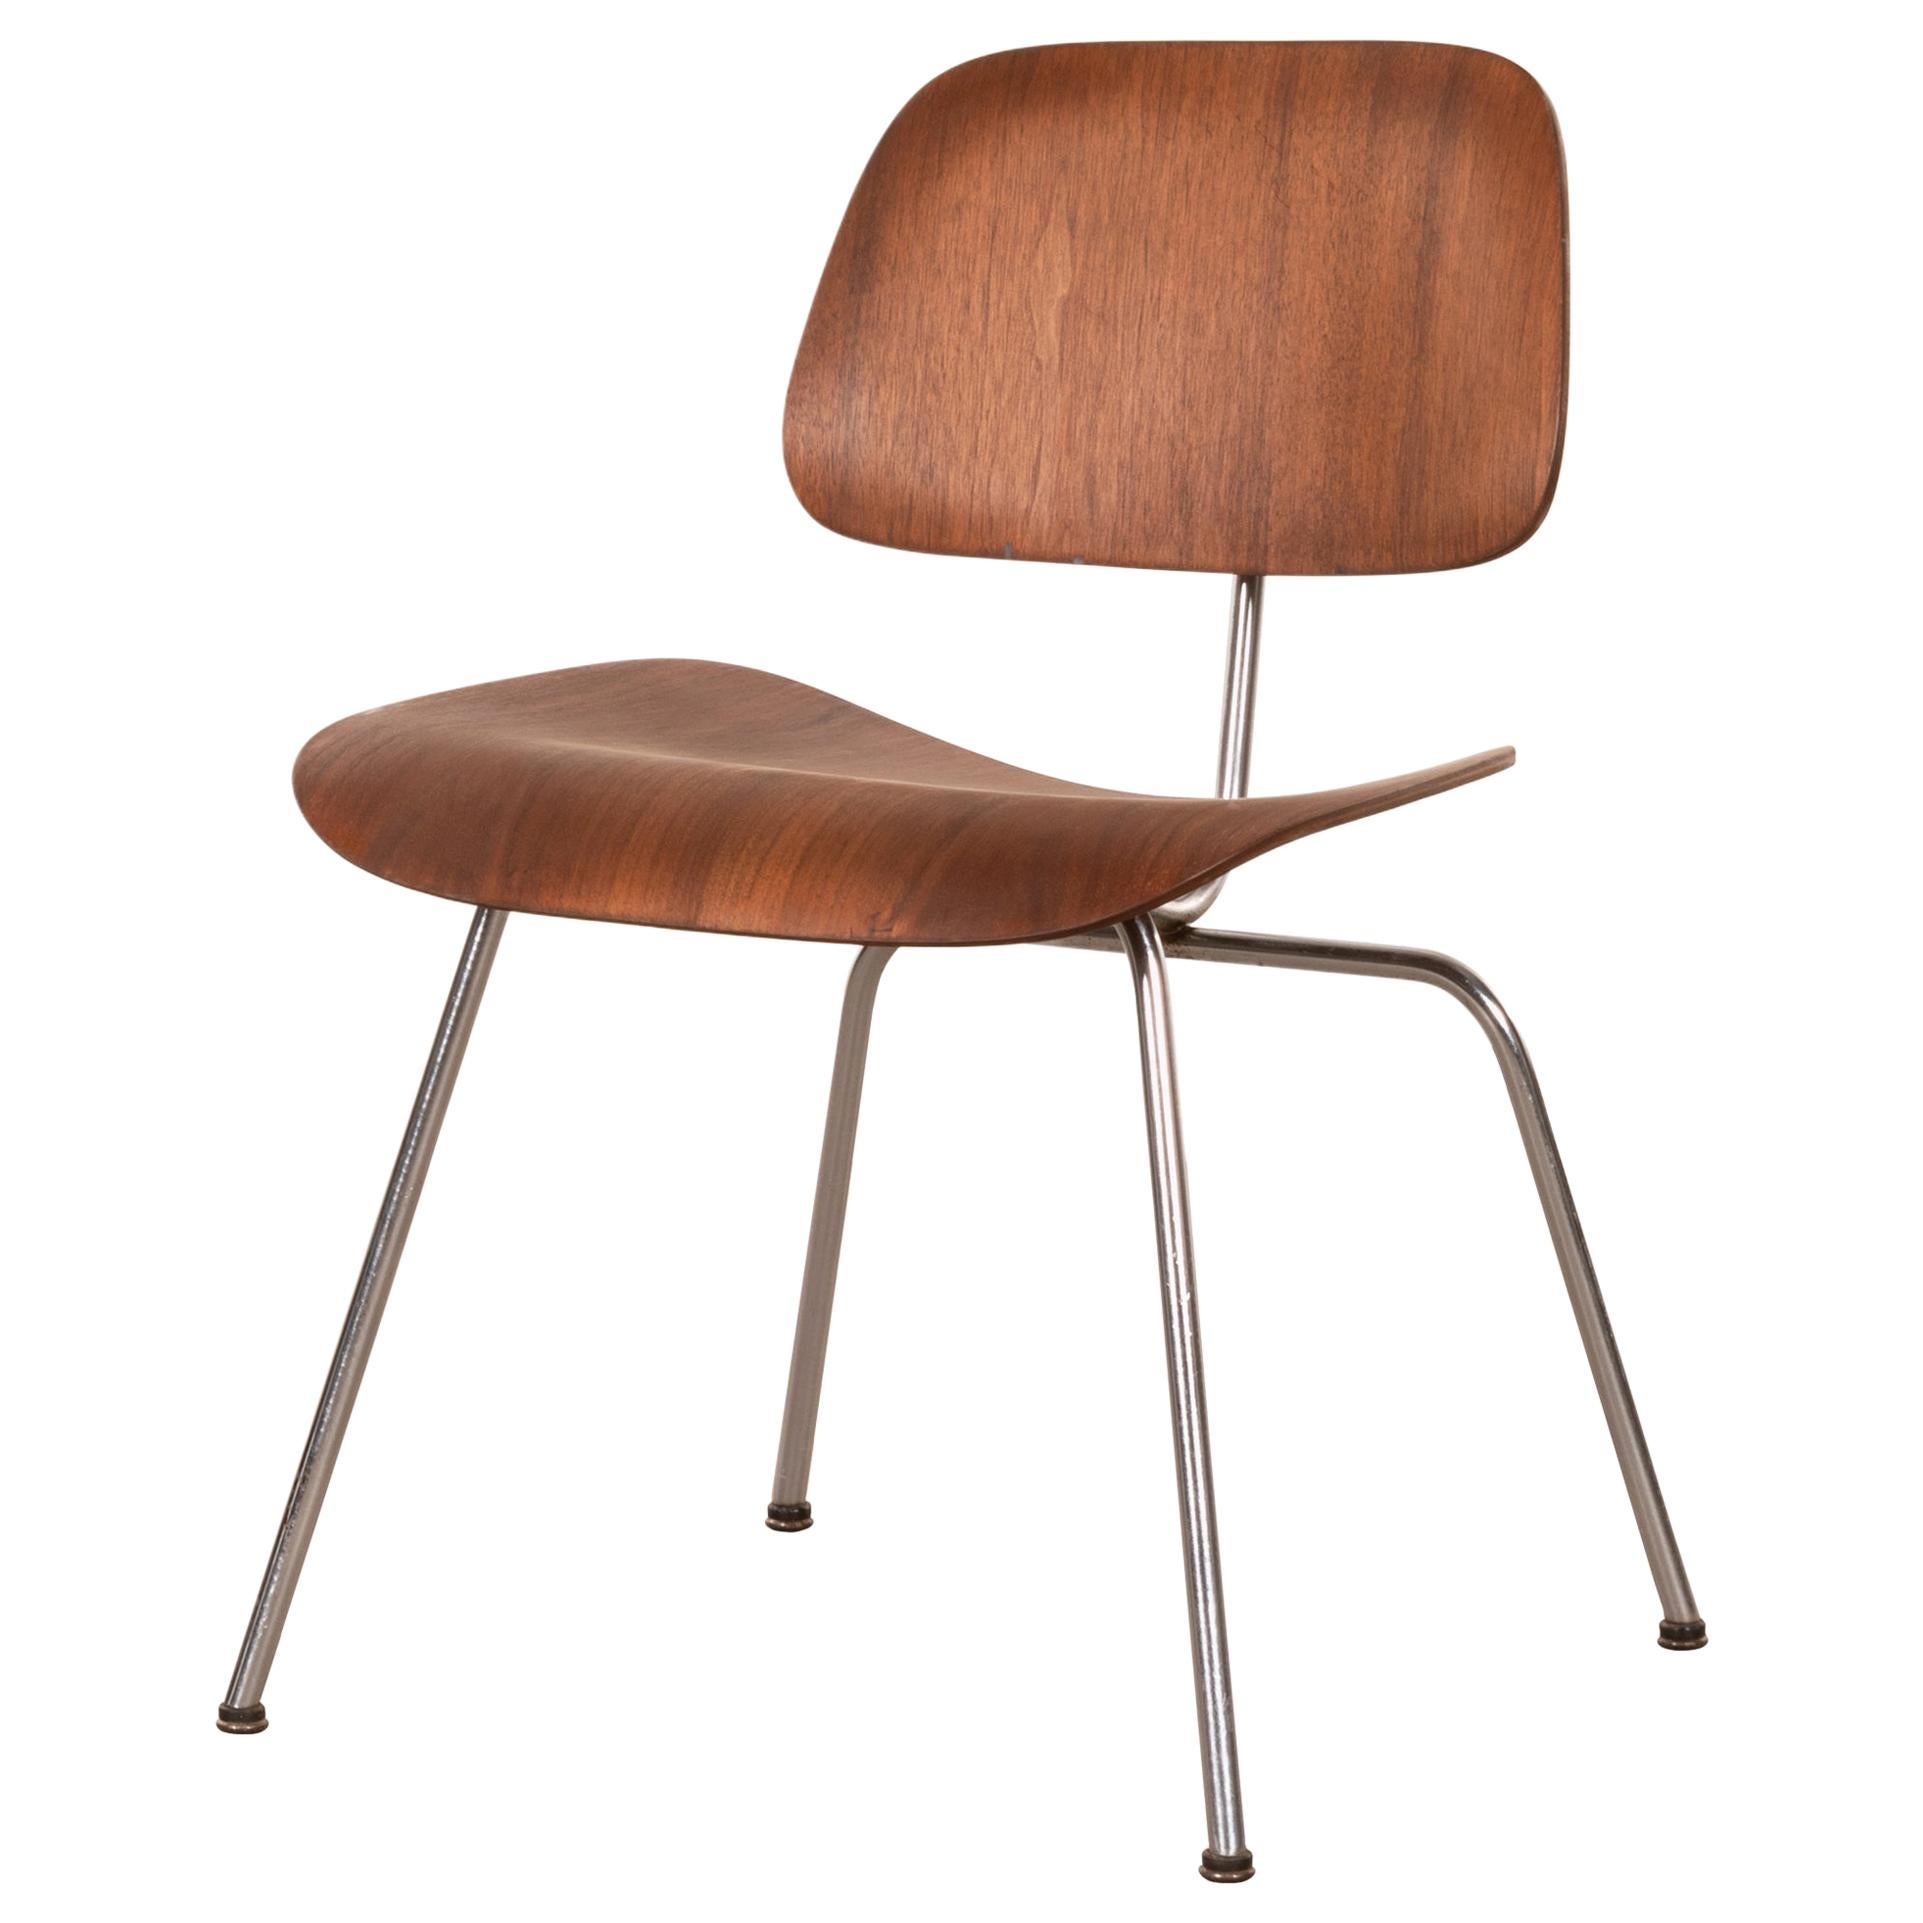 Charles & Ray Eames Early DCM Walnut Side Chair by Herman Miller, USA